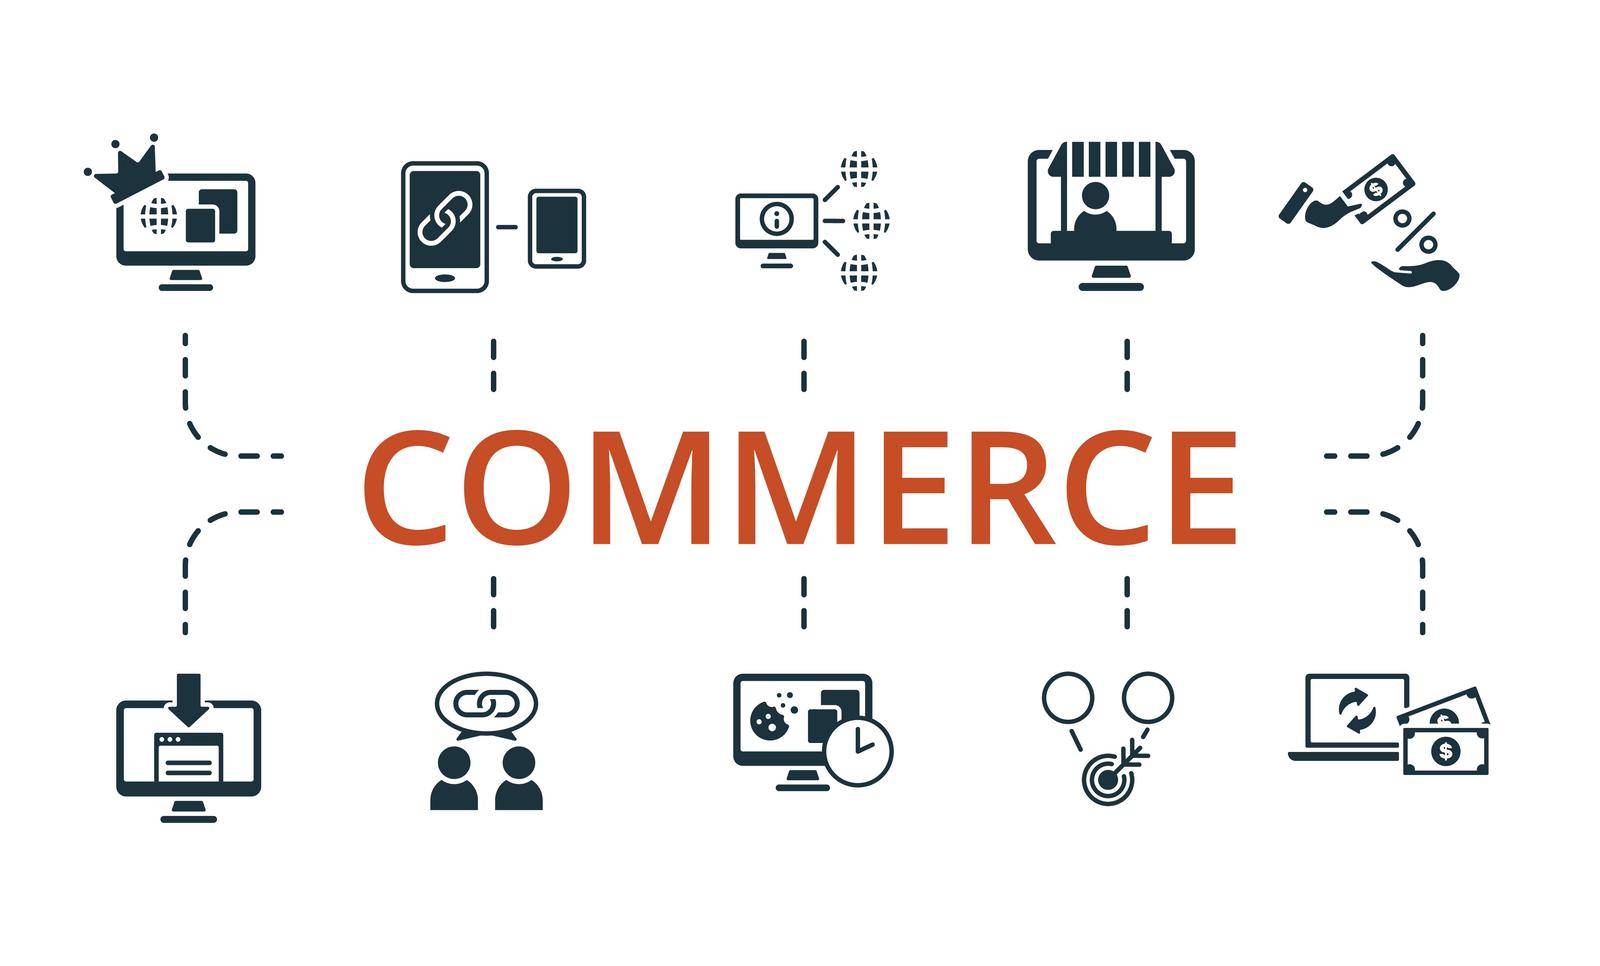 Commerce set icon. Editable icons commerce theme such as affiliate link, authority site, commission and more